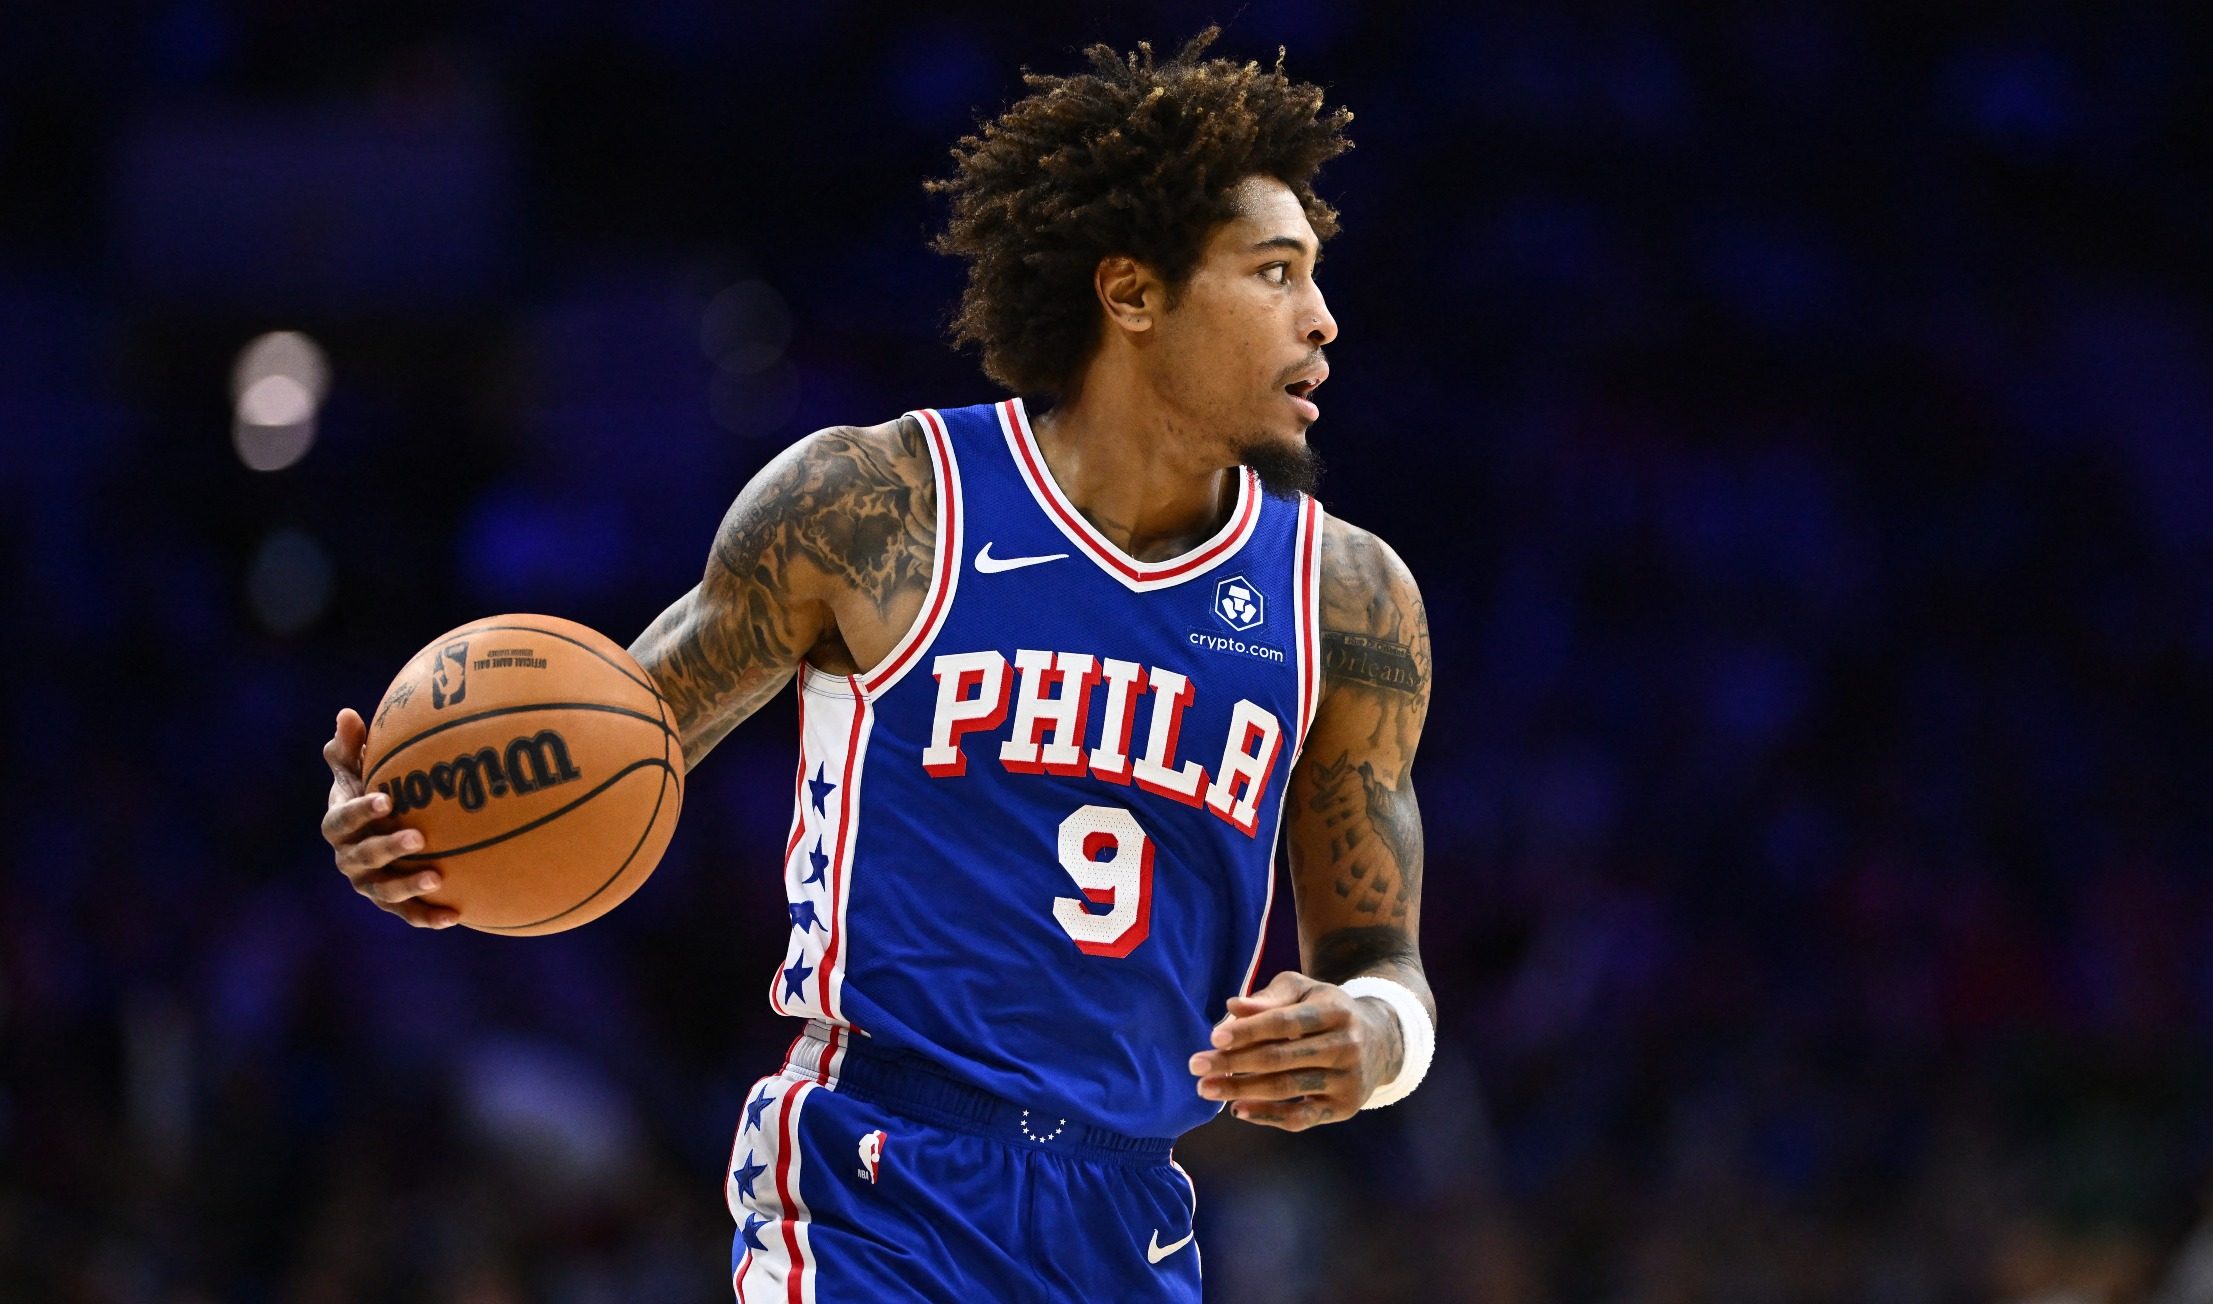 Sixers guard Kelly Oubre Jr. in stable condition after hit by vehicle